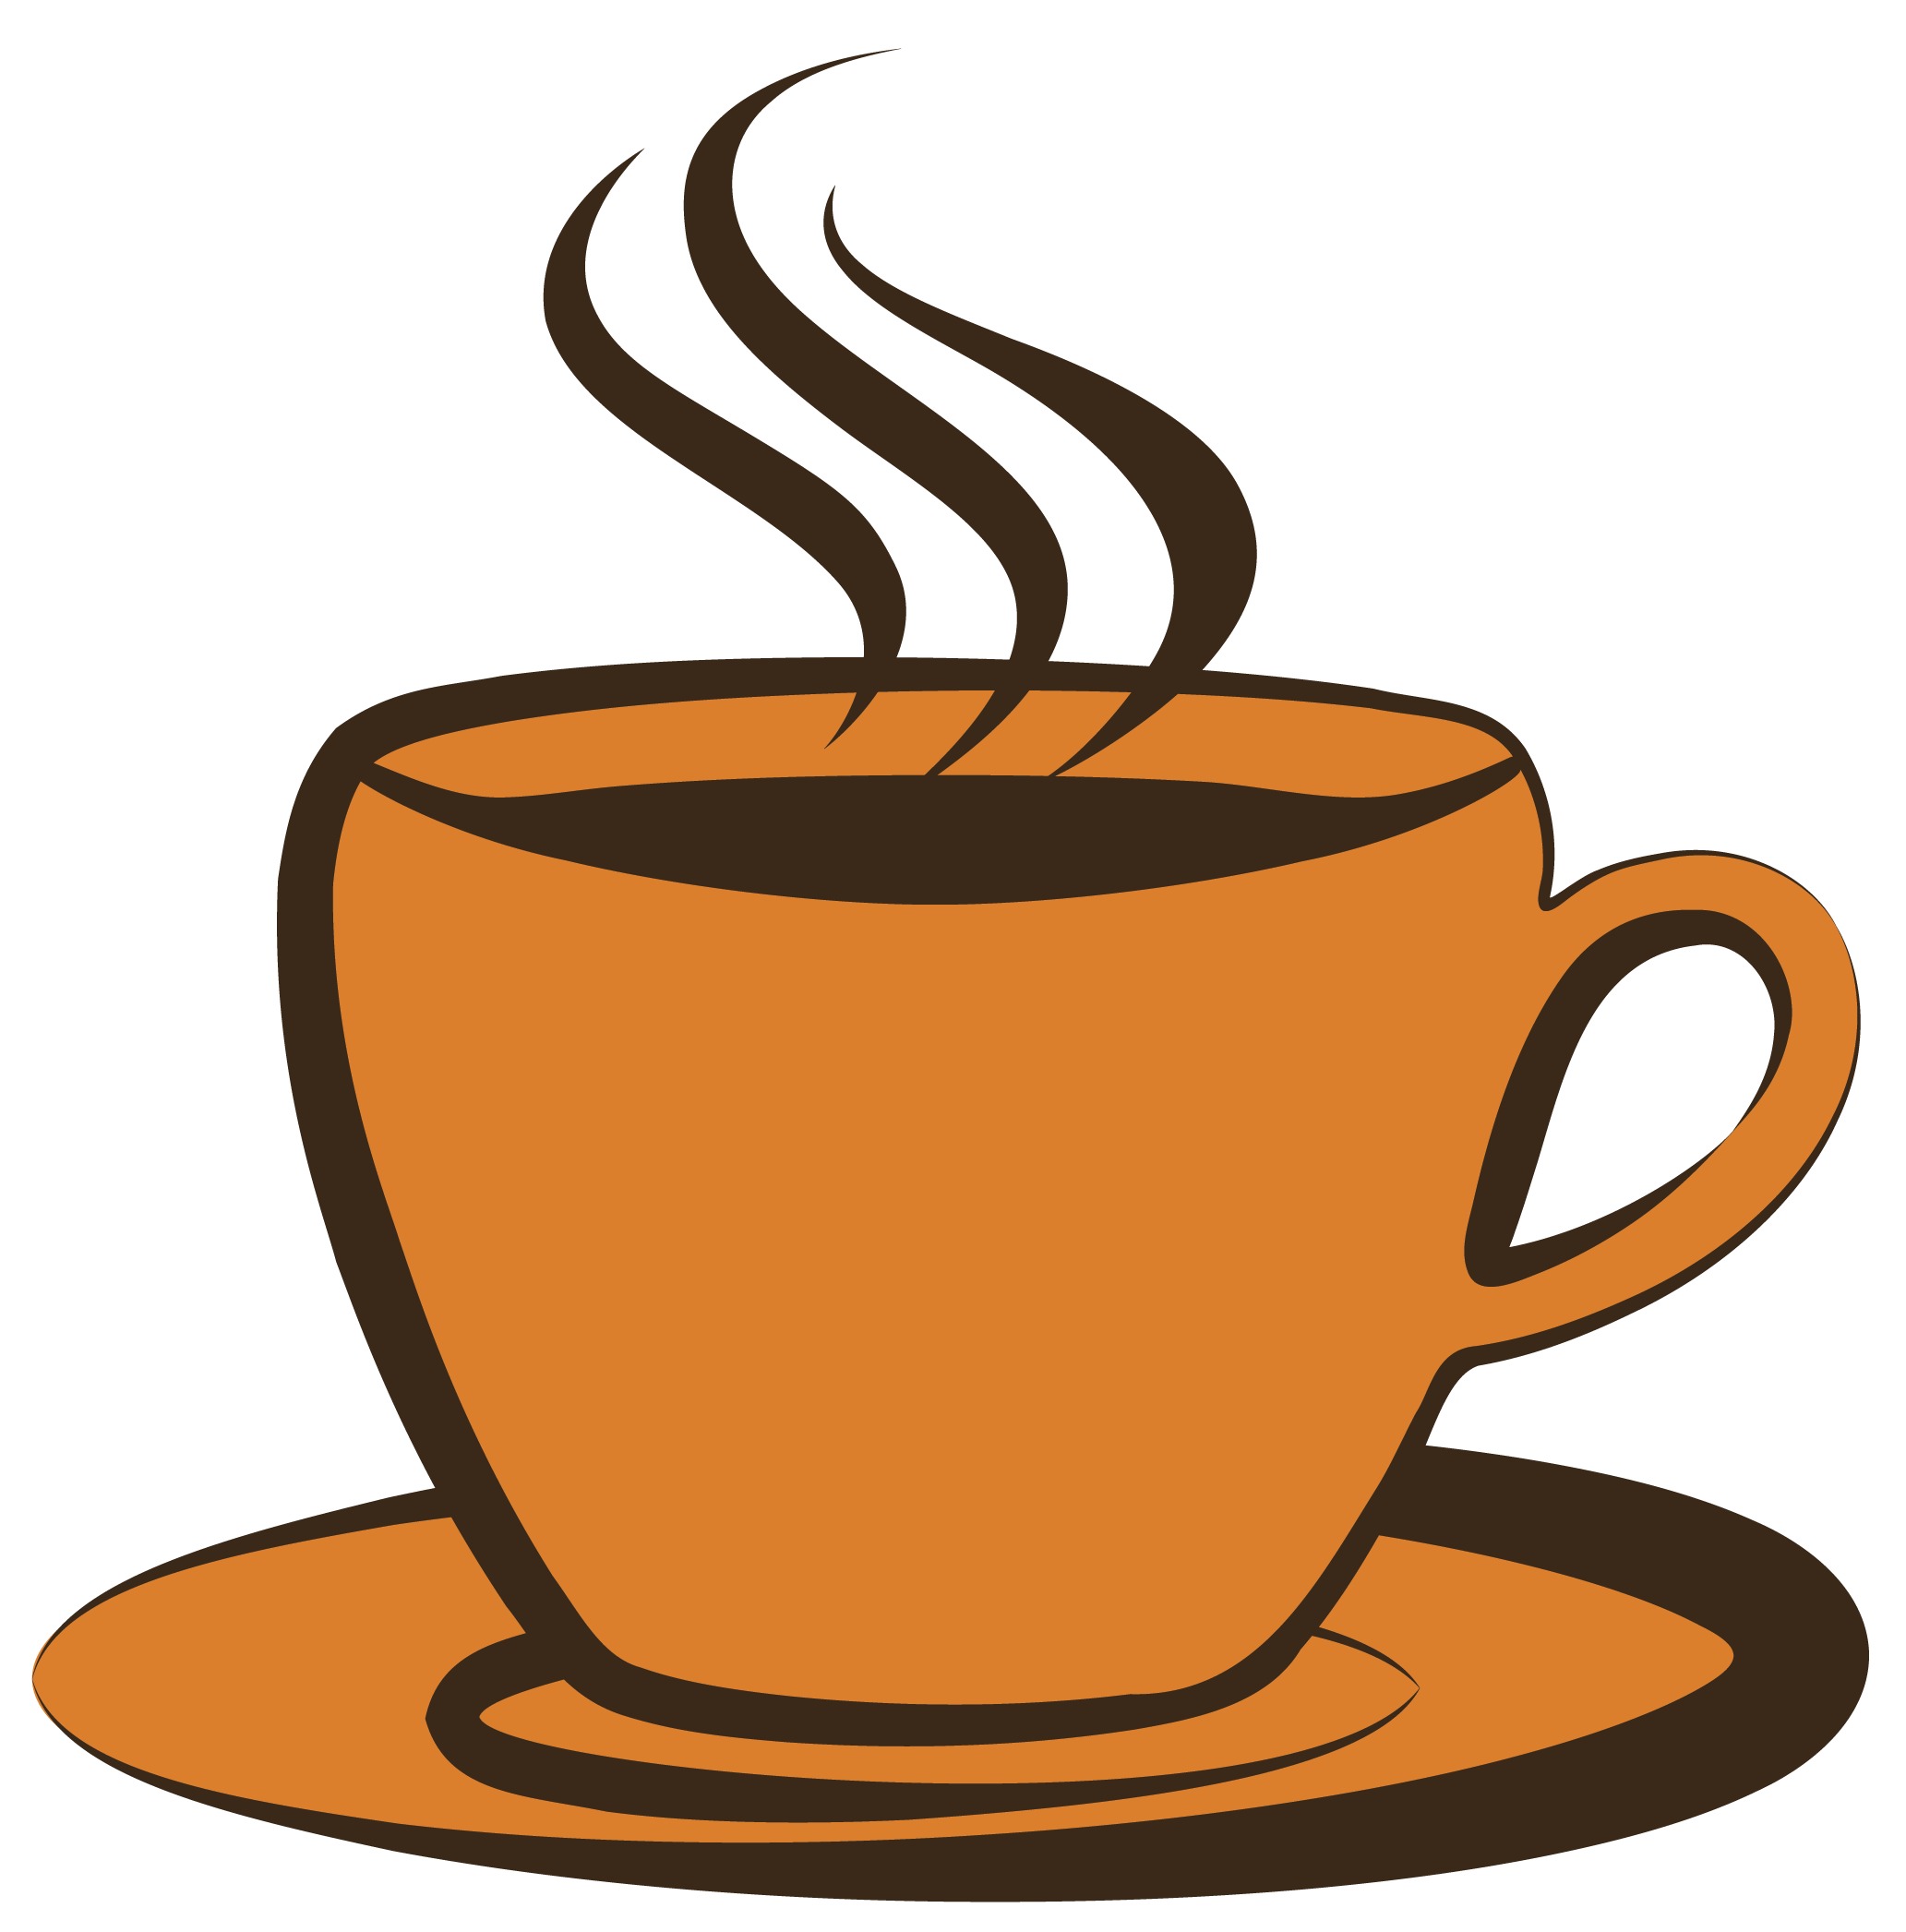 Coffee clipart image clip art a cup full of image